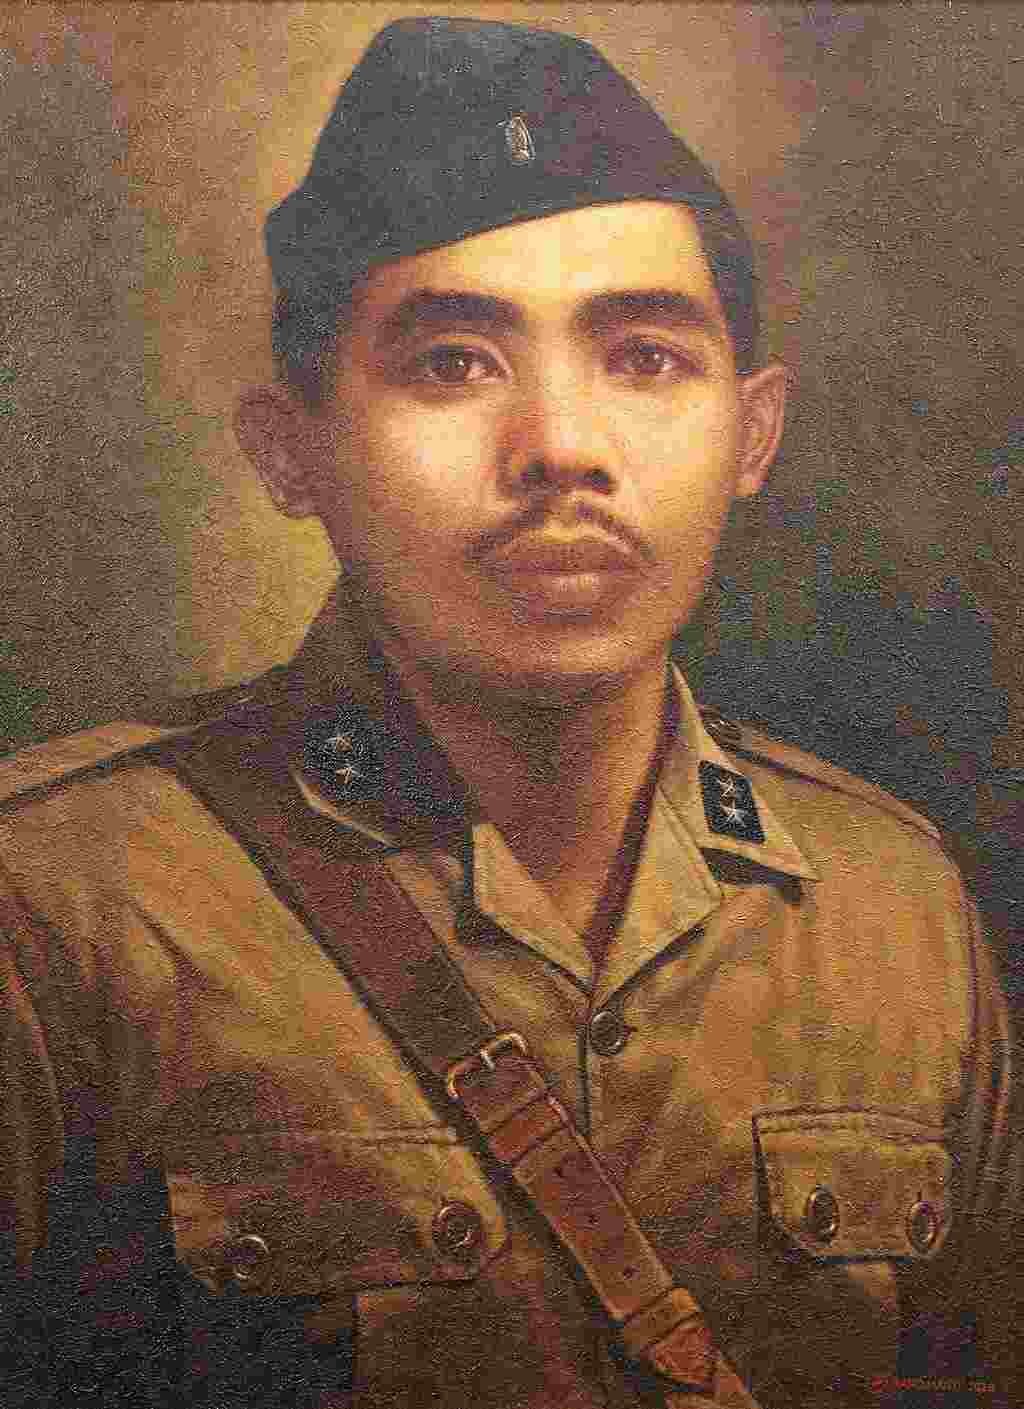 Ngurah Rai (1917–1946) Bali independence fighter was killed in the action of the War of Independence